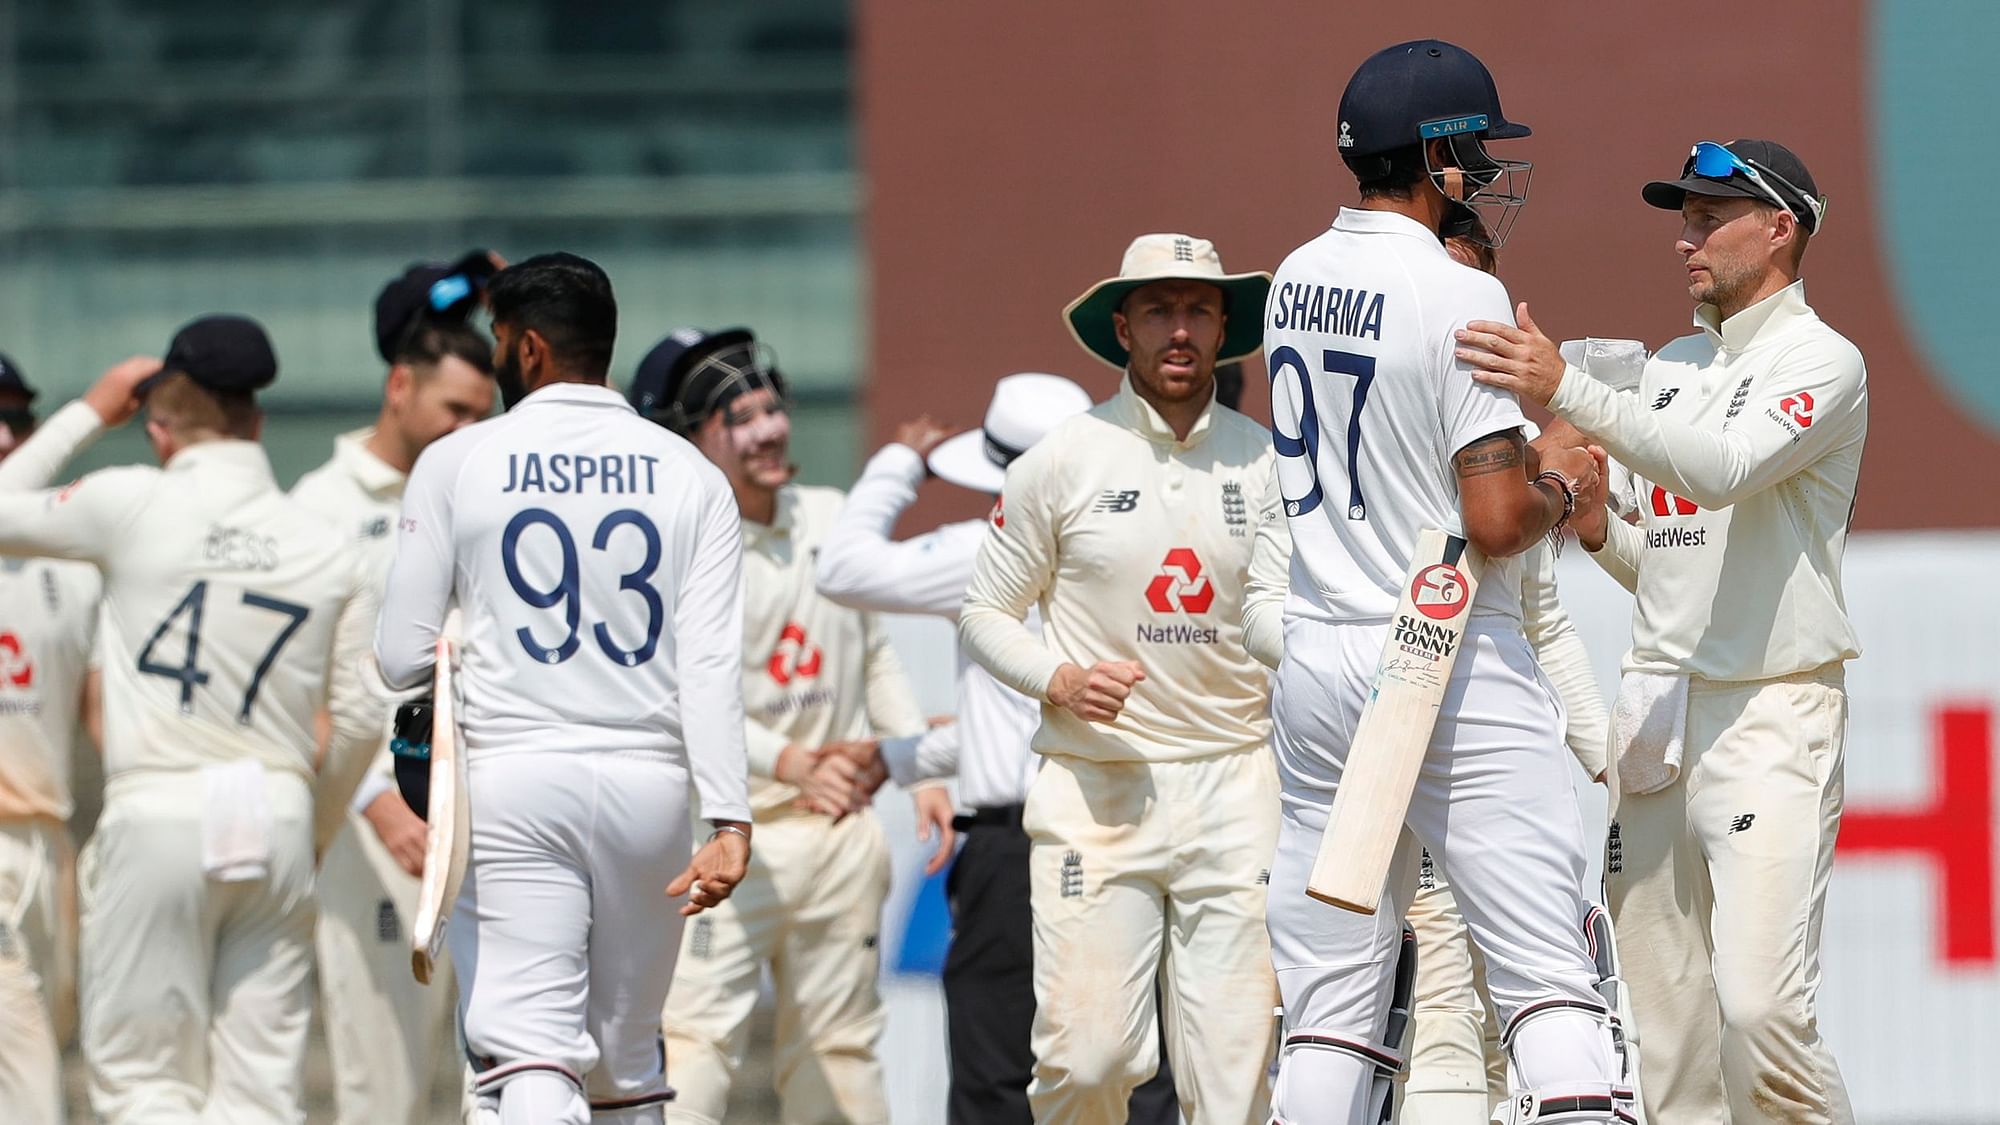 England team celebrating the match win during day five of the first test match between India and England held at the Chidambaram Stadium stadium in Chennai.